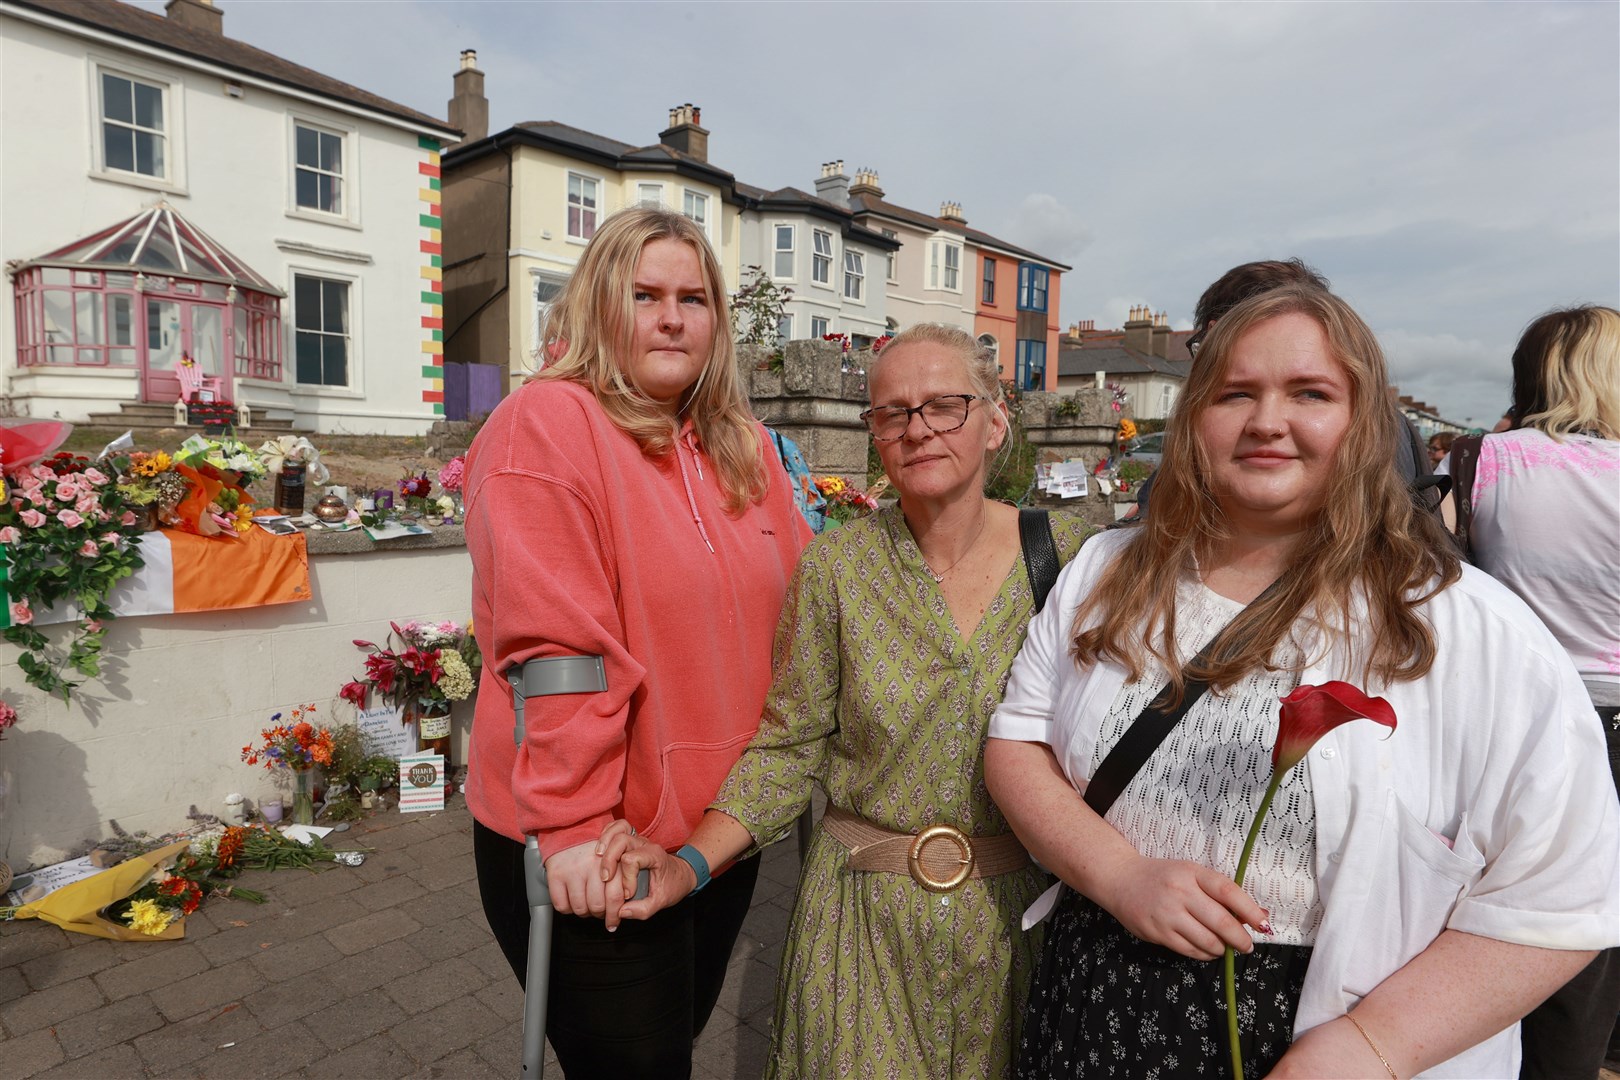 Ruth O’Shea, centre, with daughters Emily, right, and Daisy (Liam McBurney/PA)